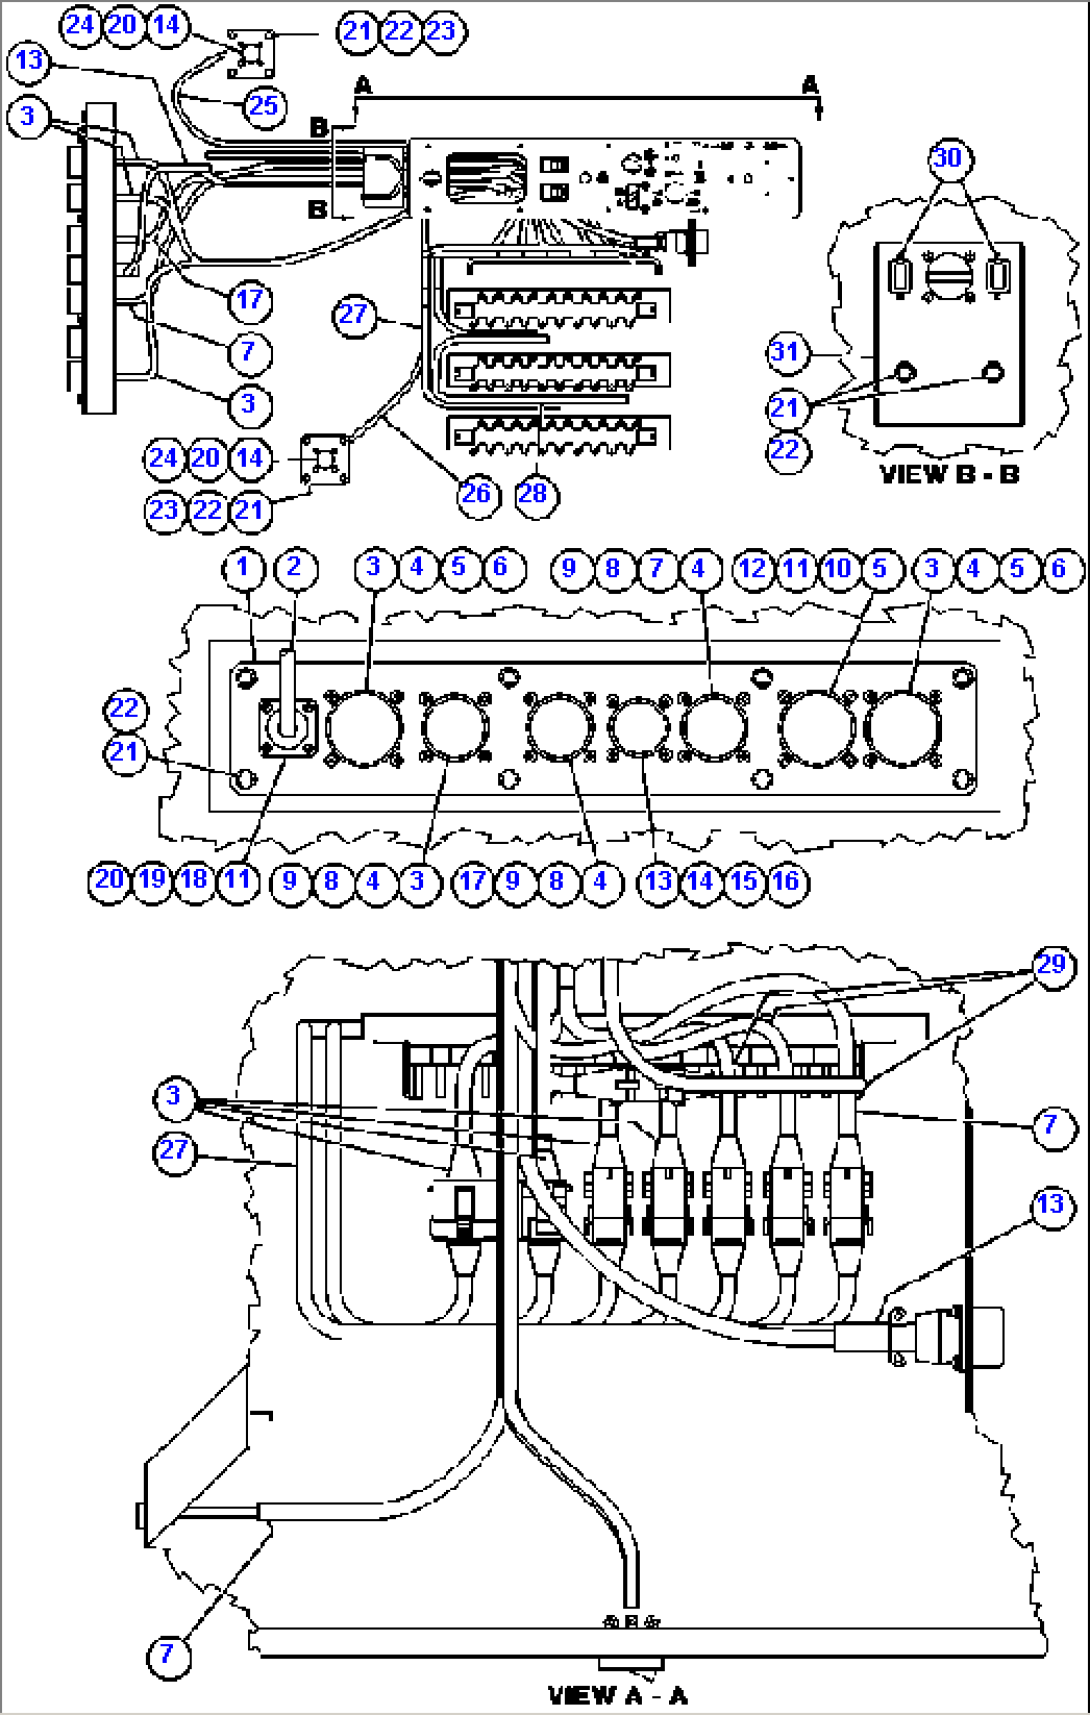 CAB CONNECTOR PLATE & WIRING